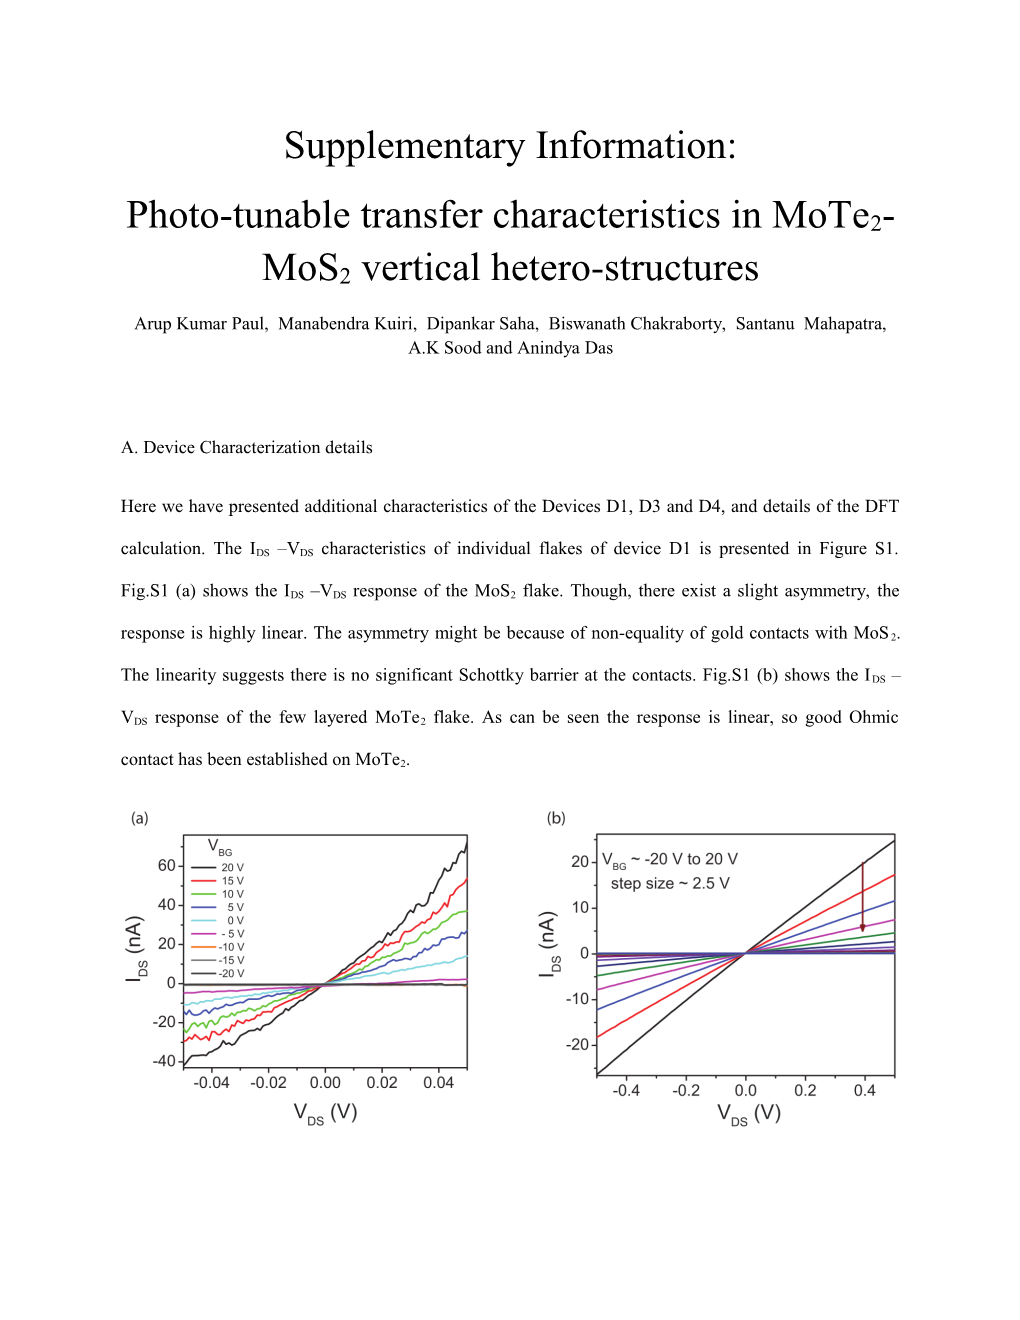 Photo-Tunable Transfer Characteristics in Mote2-Mos2 Vertical Hetero-Structures